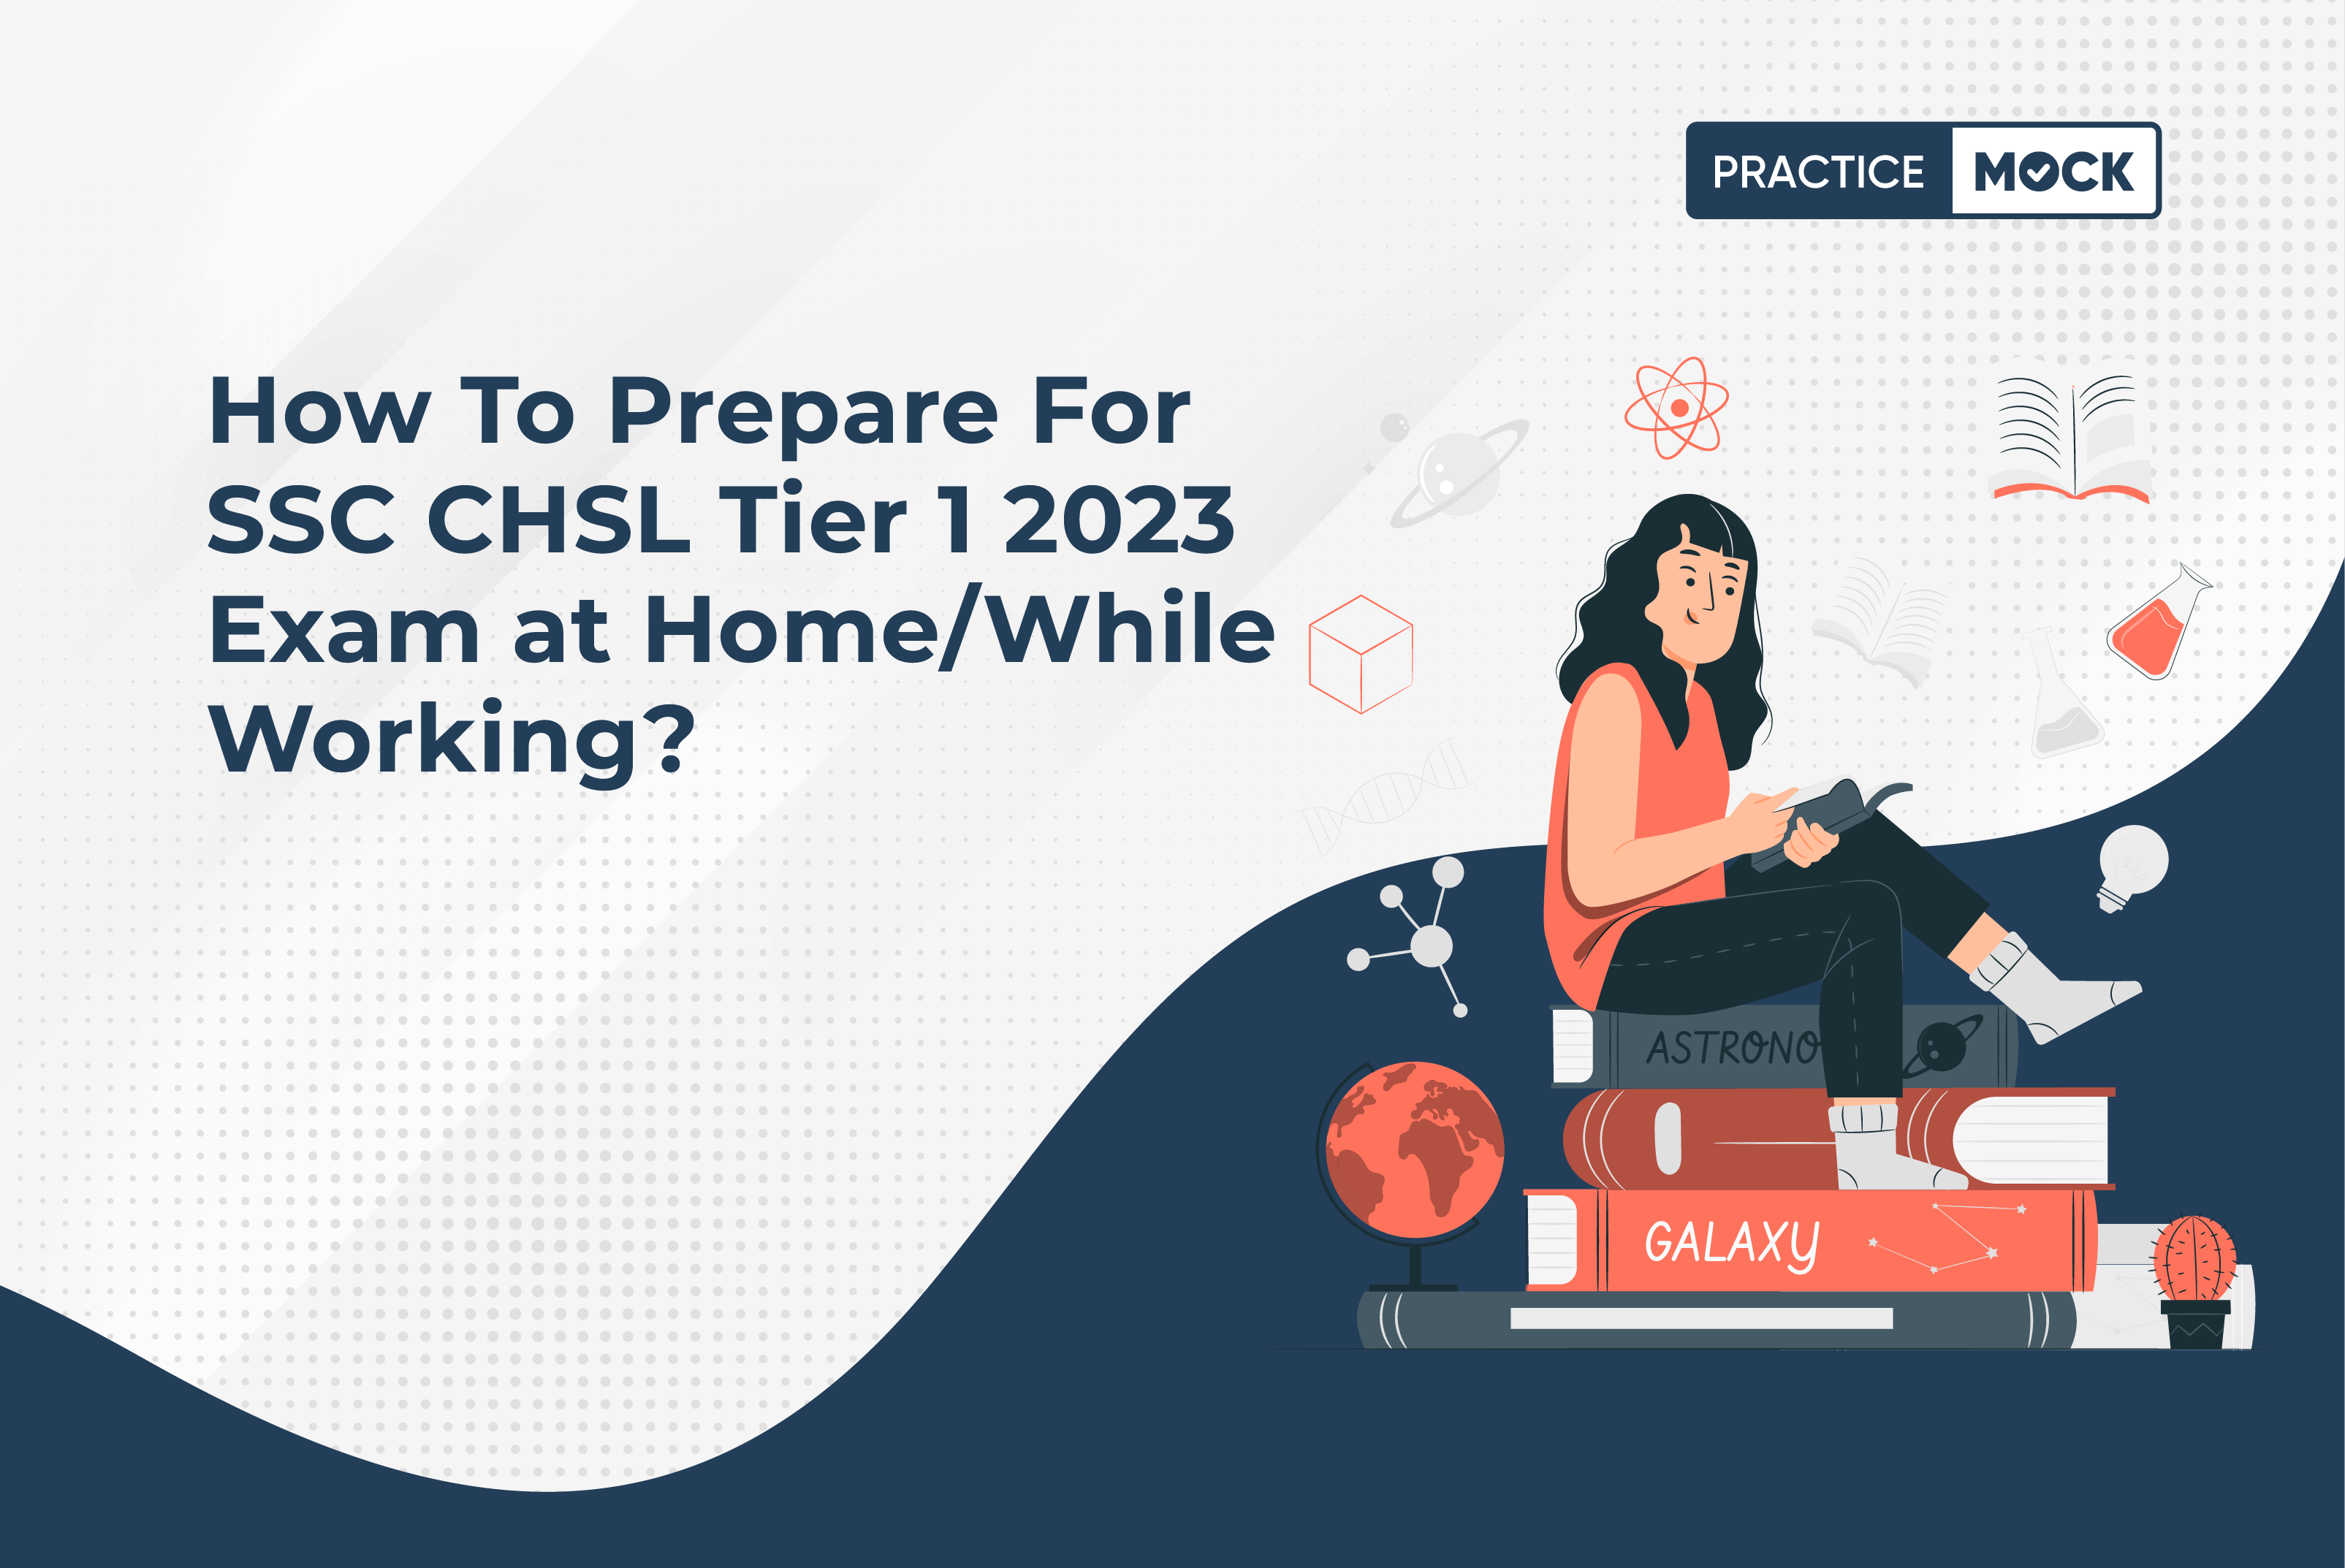 How to Prepare for SSC CHSL Tier 1 2023 Exam at Home/While Working?